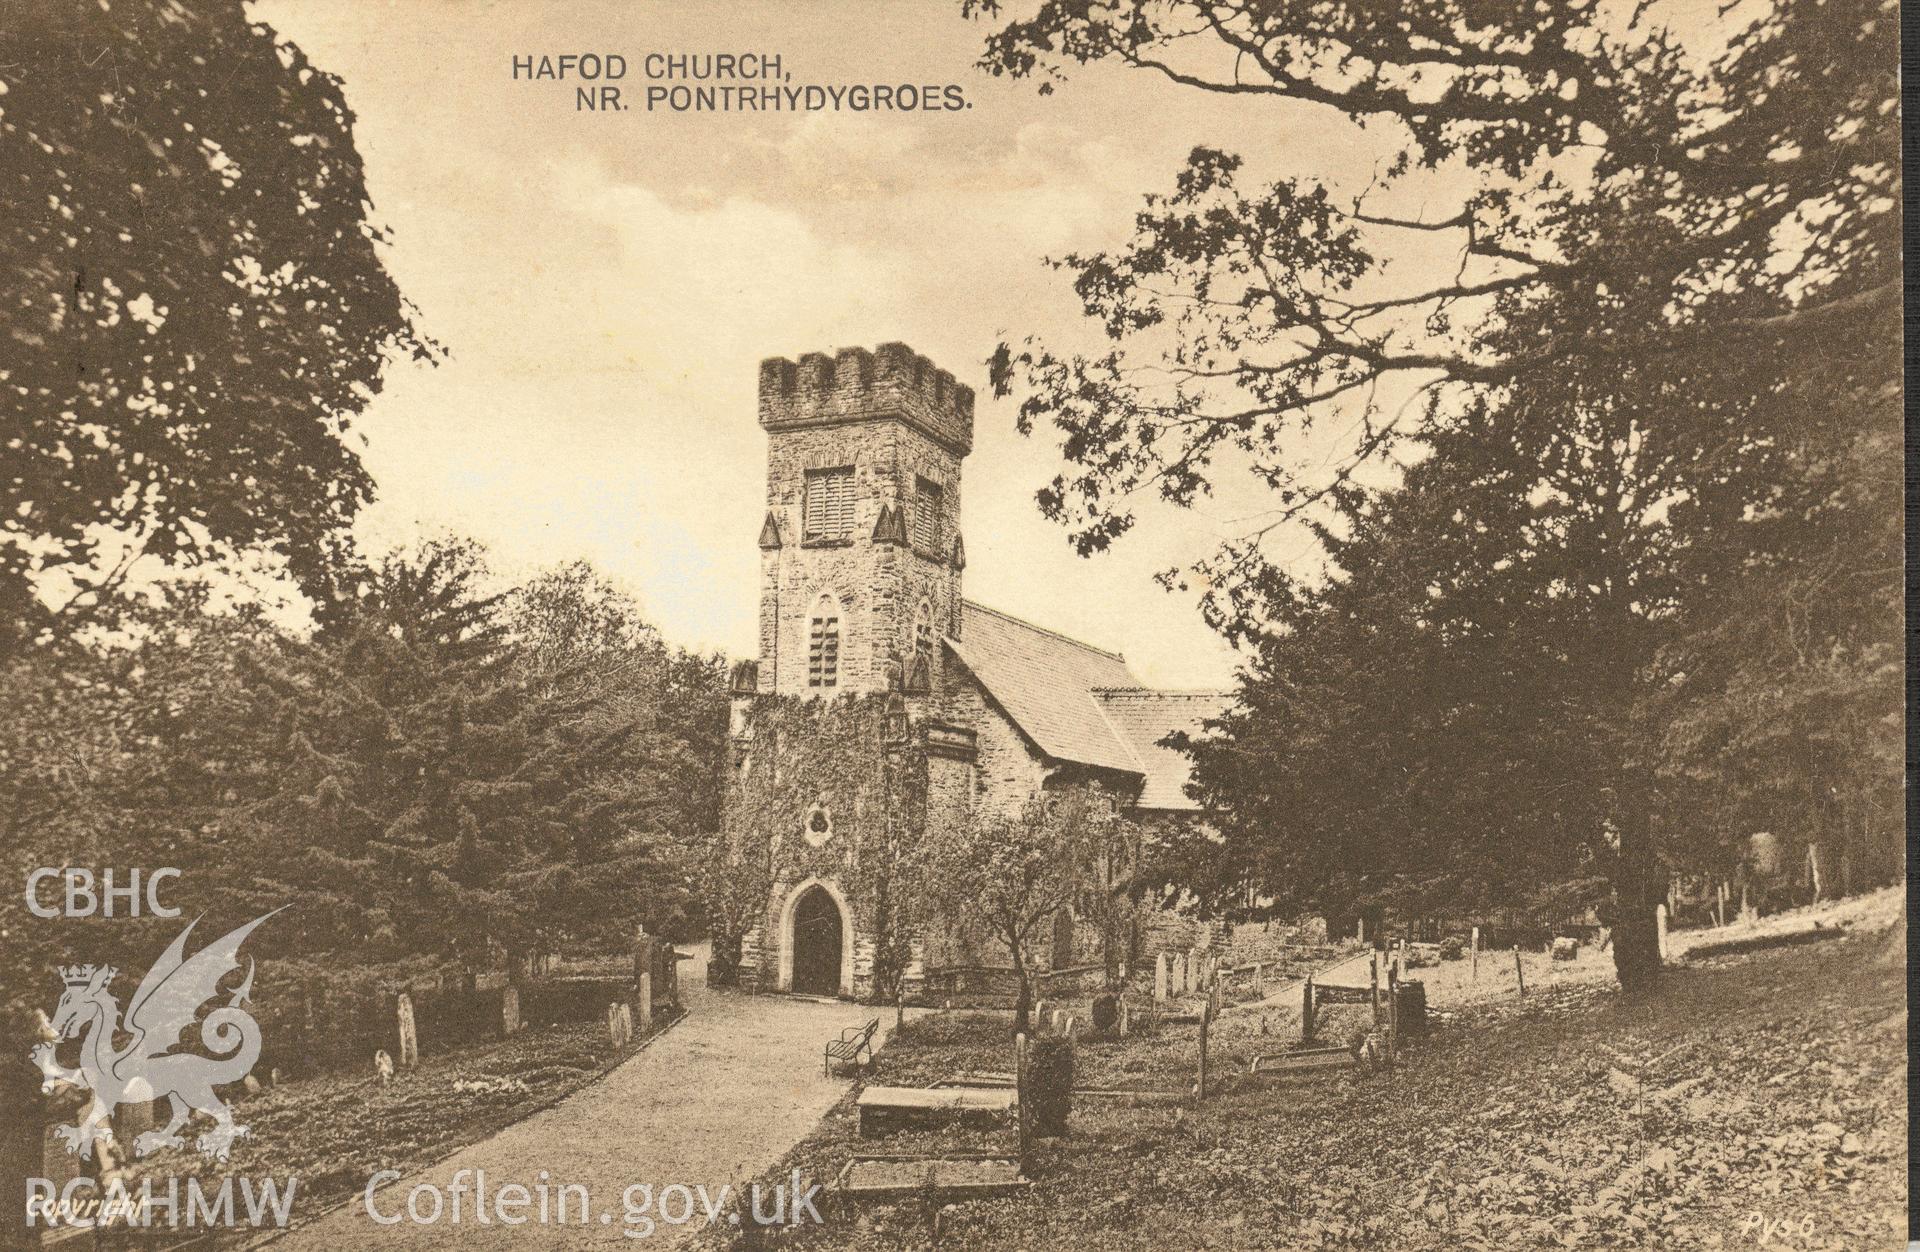 Digitised postcard image of Hafod Uchtryd Church, Pontarfynach. Produced by Parks and Gardens Data Services, from an original item in the Peter Davis Collection at Parks and Gardens UK. We hold only web-resolution images of this collection, suitable for viewing on screen and for research purposes only. We do not hold the original images, or publication quality scans.